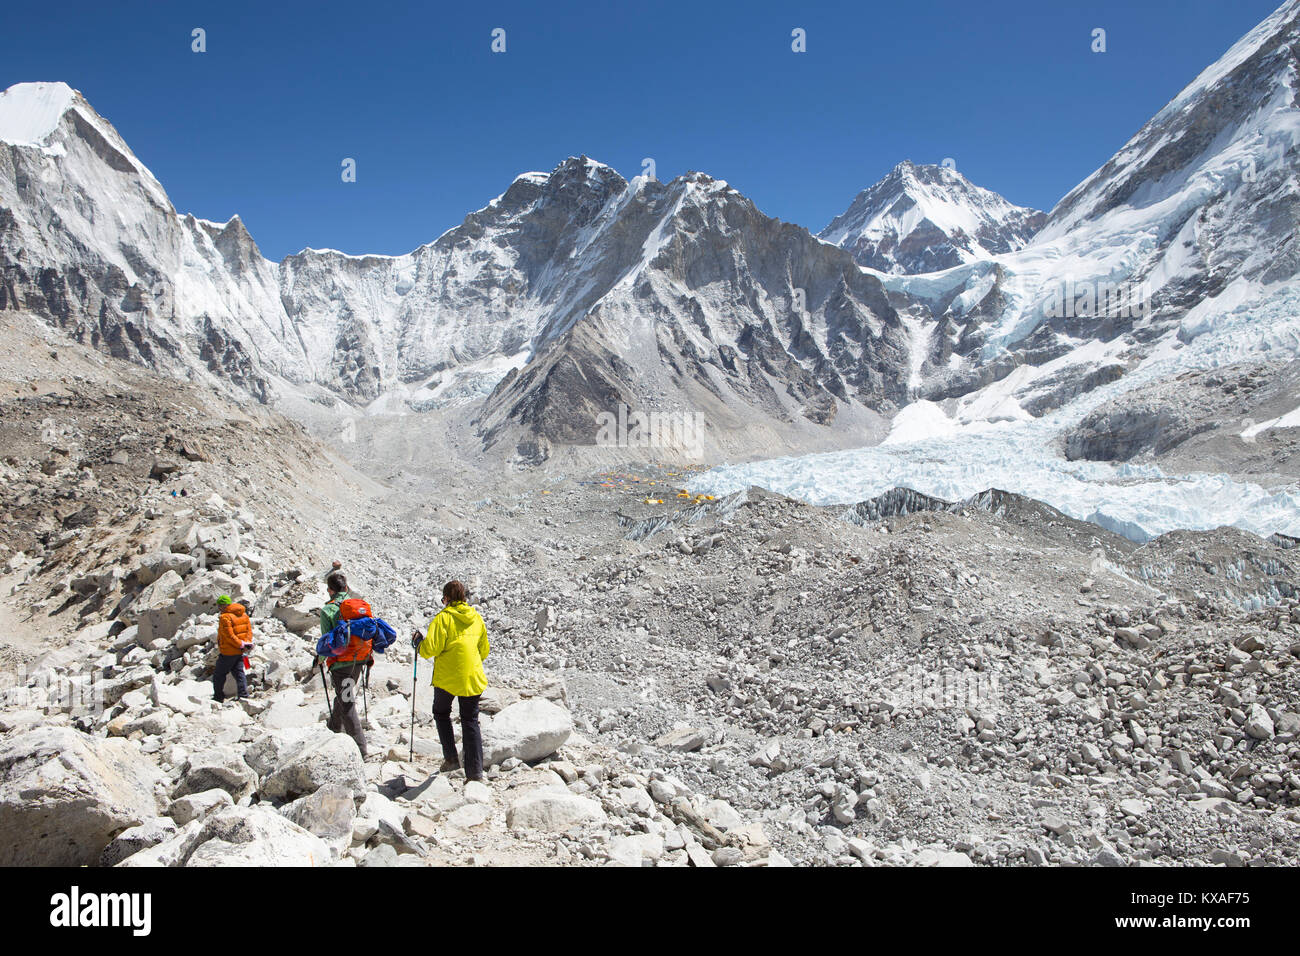 Three hikers are arriving in Everest Base Camp after a trekking through the Nepalese Khumbu valley. Stock Photo